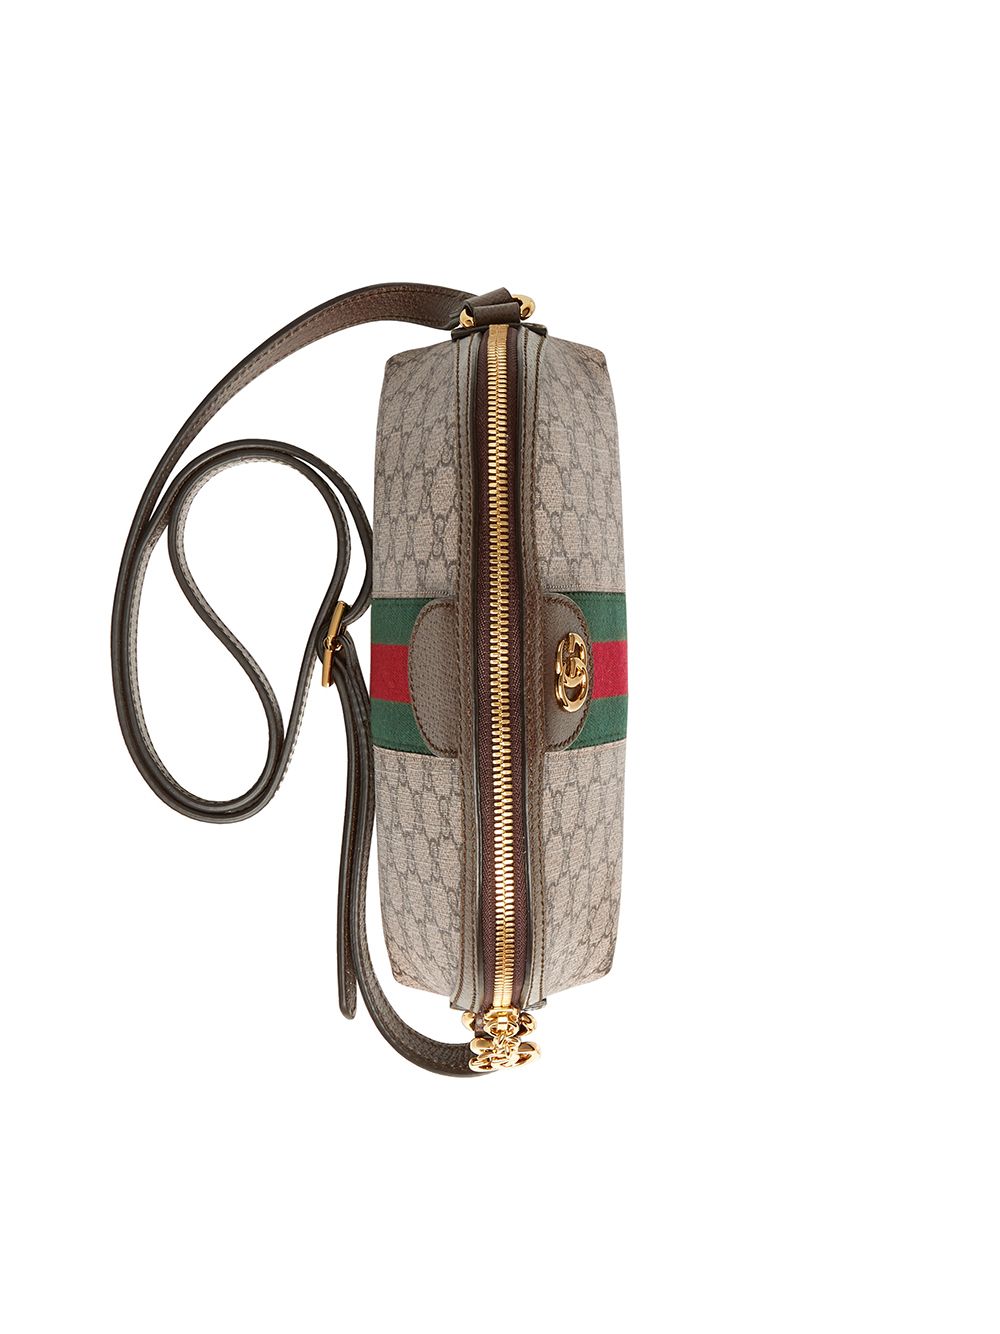 Gucci Small Ophidia GG Supreme Backpack - Farfetch